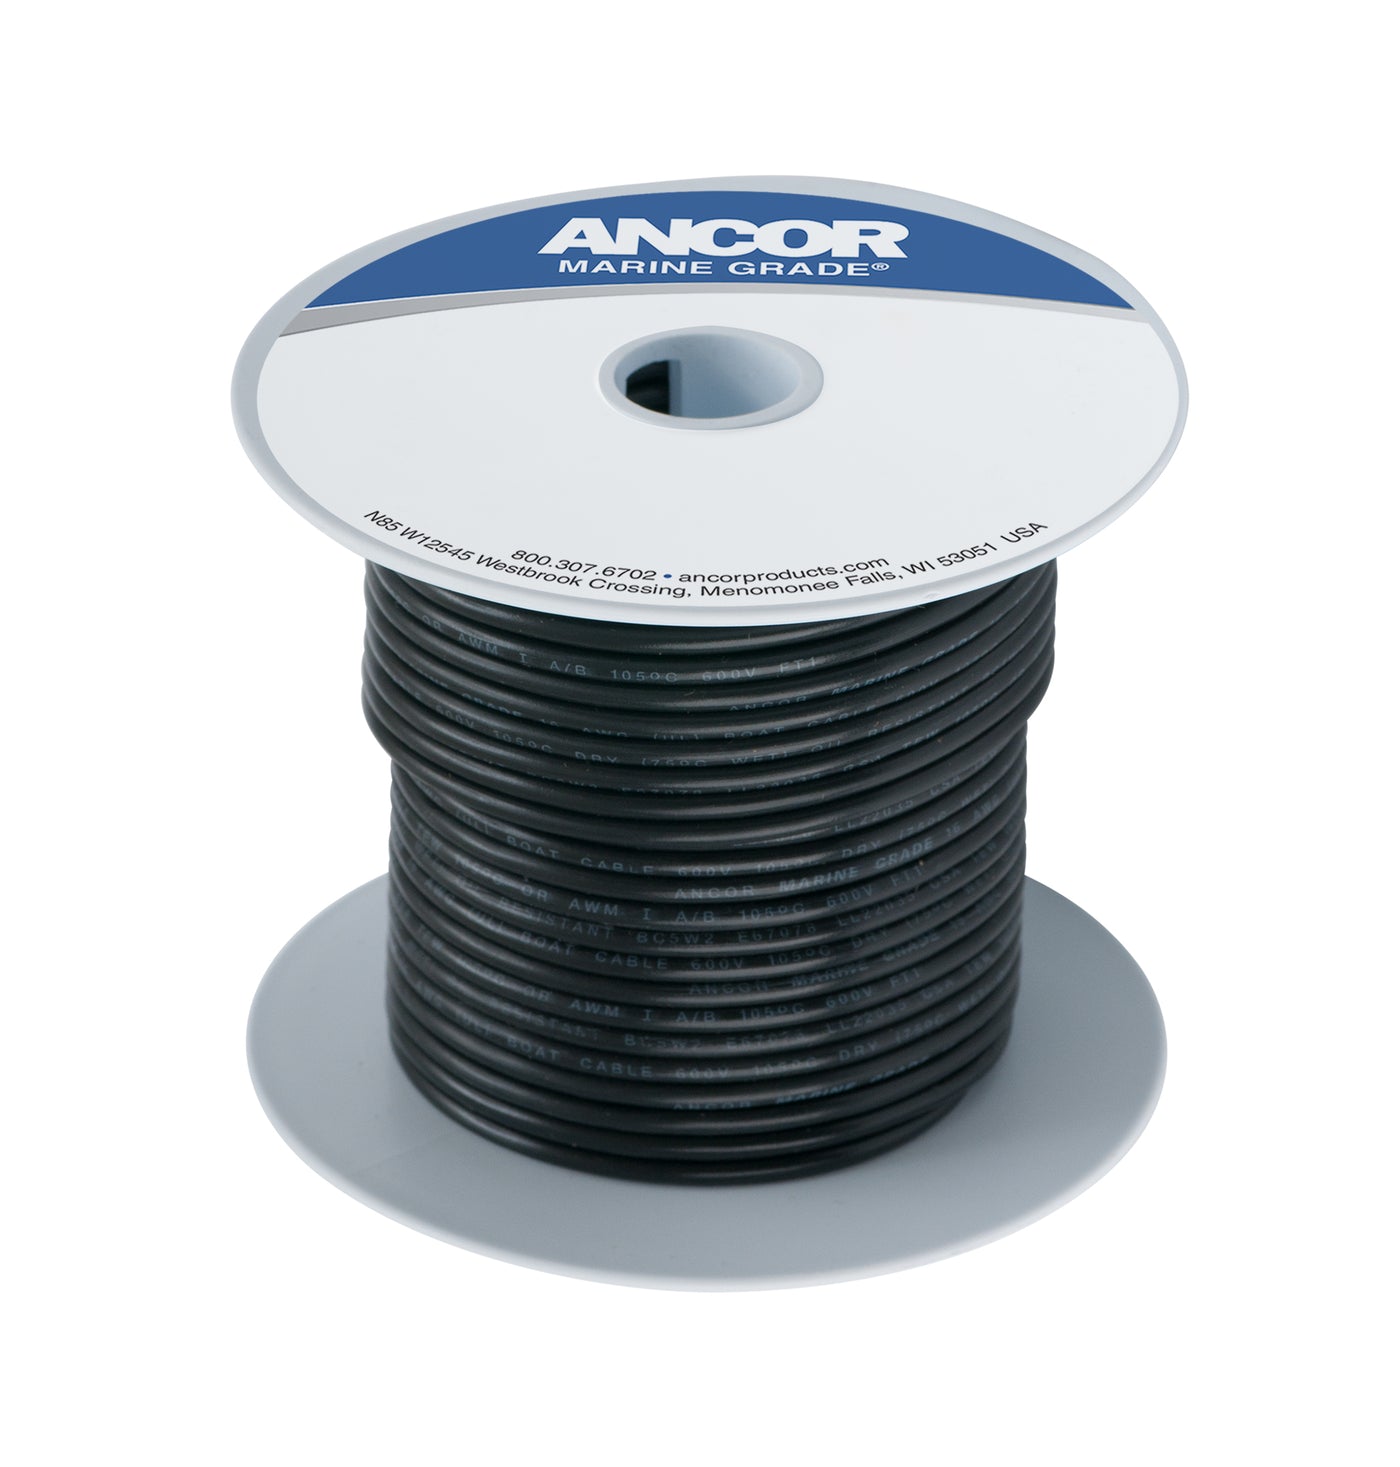 Ancor 111002 Tinned Copper Wire, 8 AWG (8mm²), Black - 25ft